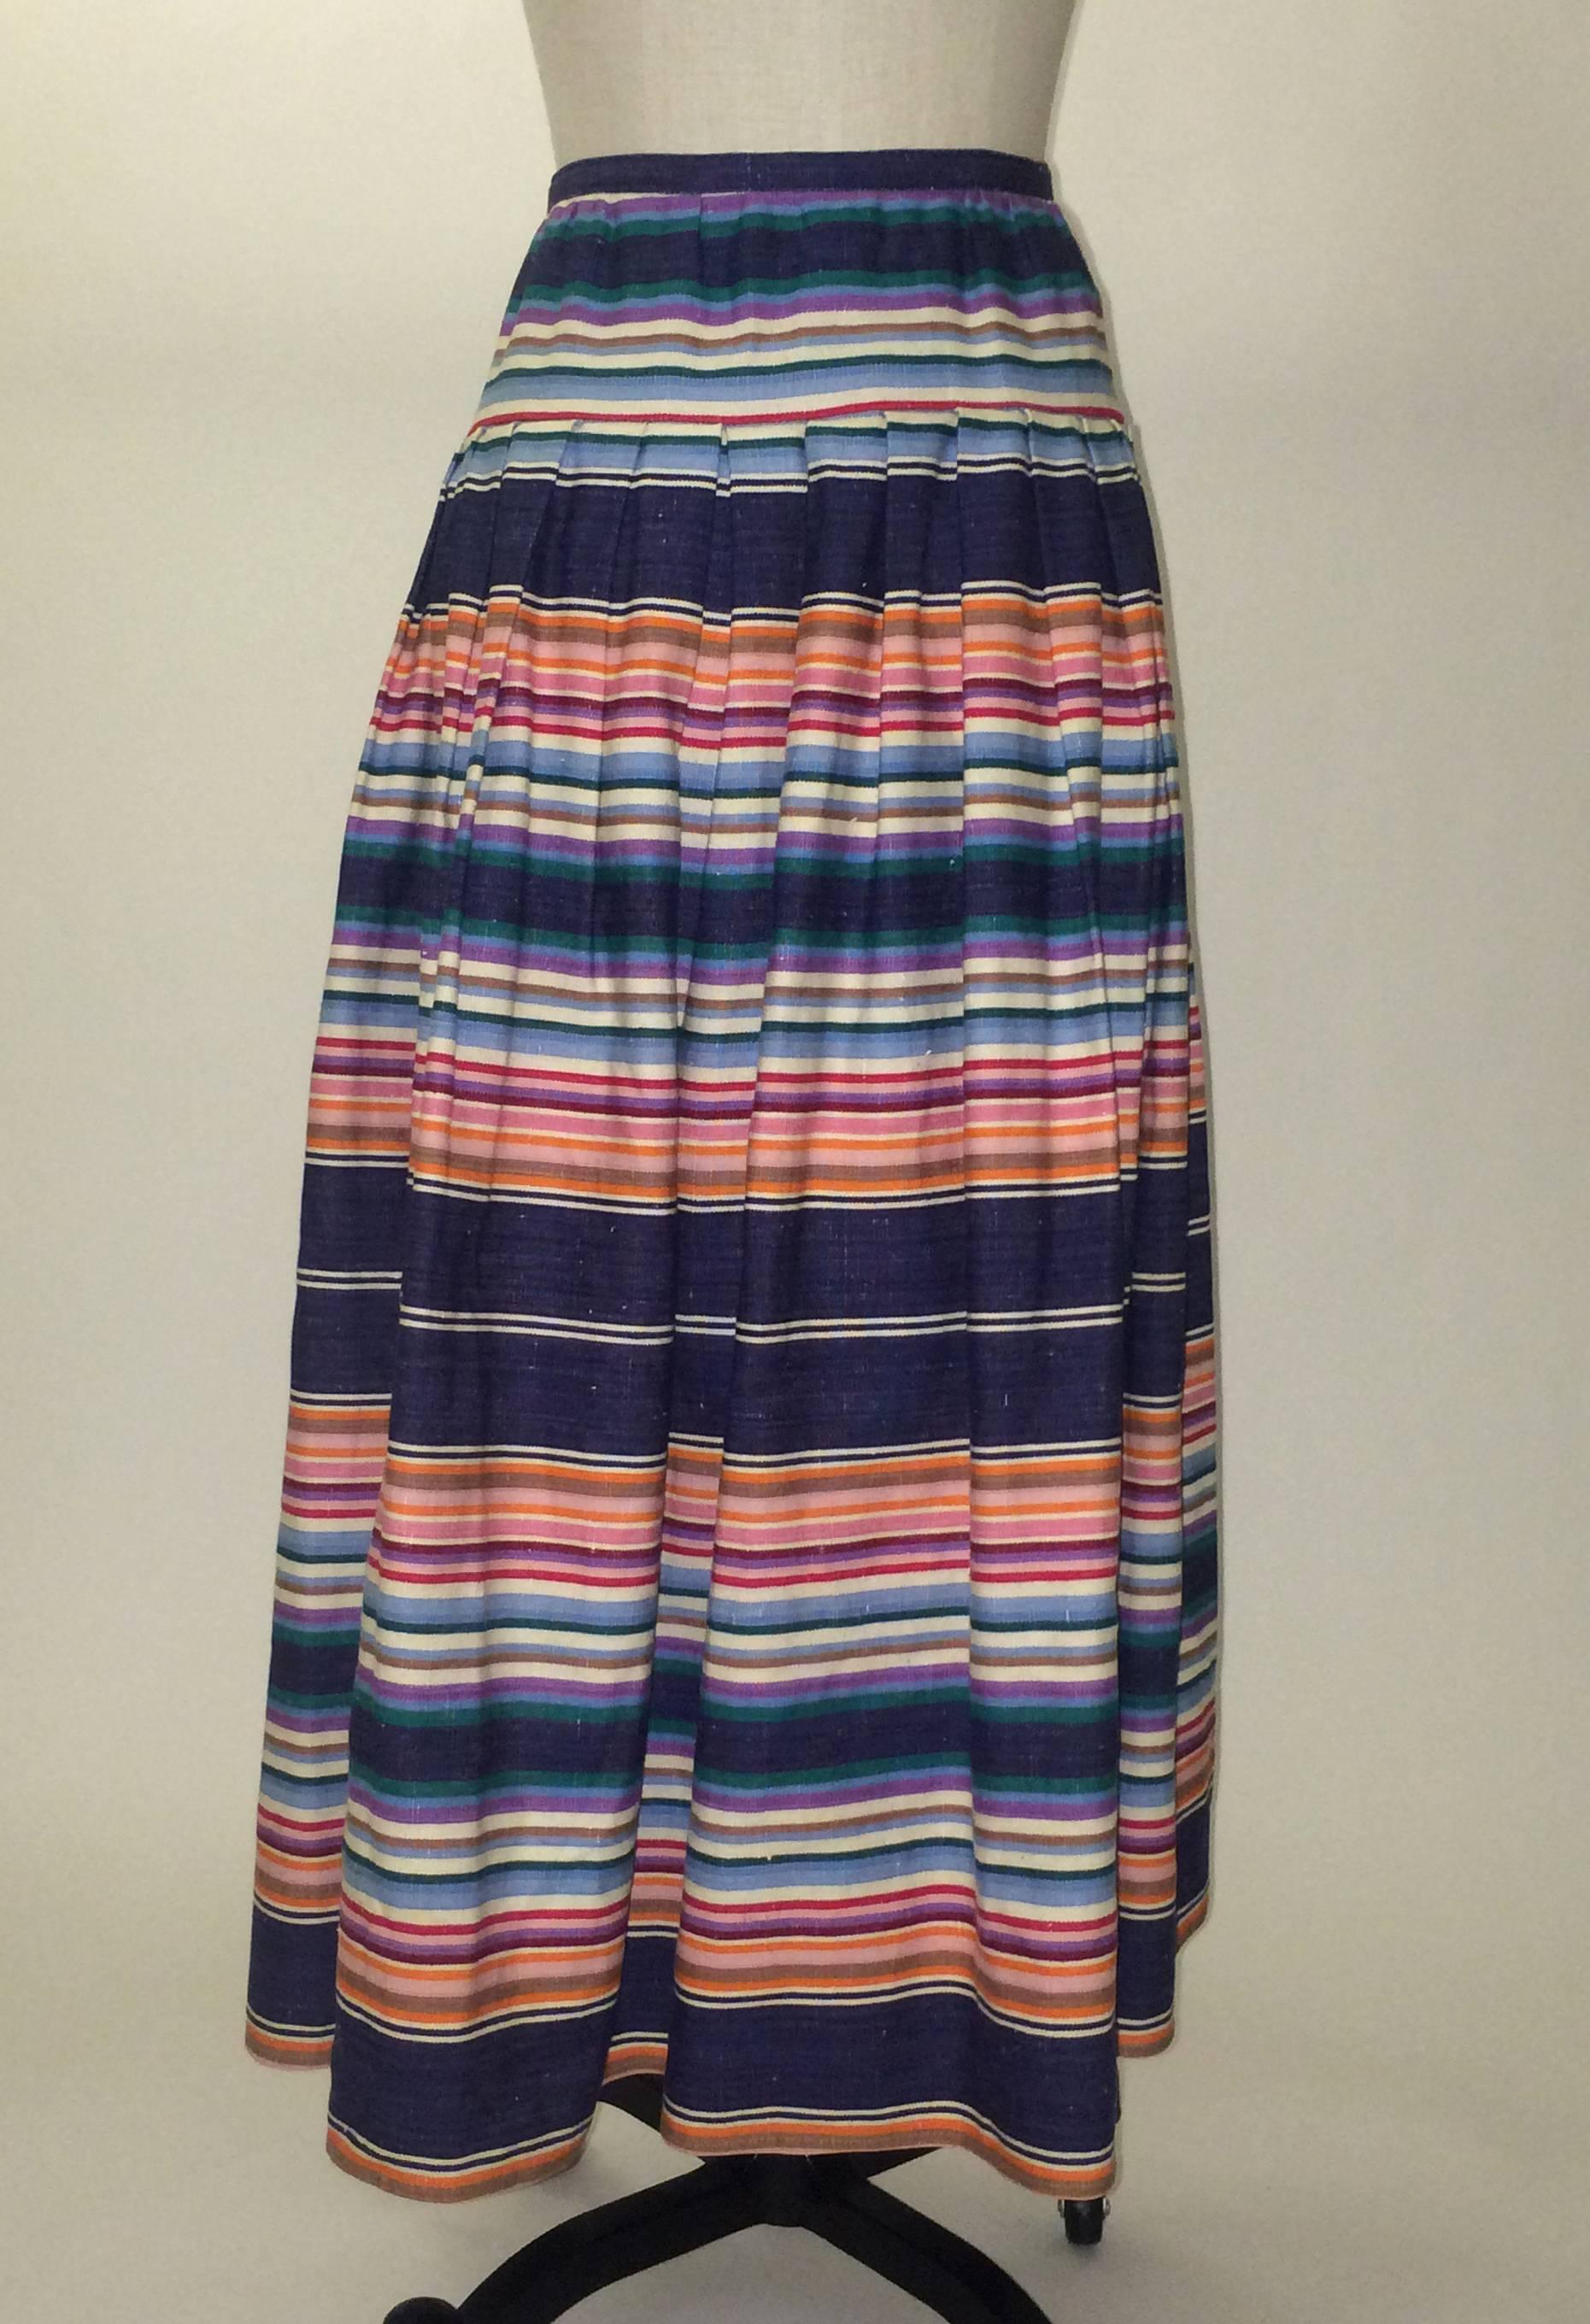 Giorgio Sant'Angelo 1980's navy skirt with orange, pink, turquoise, blue, and purple stripes. Slightly nubby texture throughout the weave. Back zip. Perfect for summer with a chunky open knit sweater or just a t-shirt! 

No content label, feels like